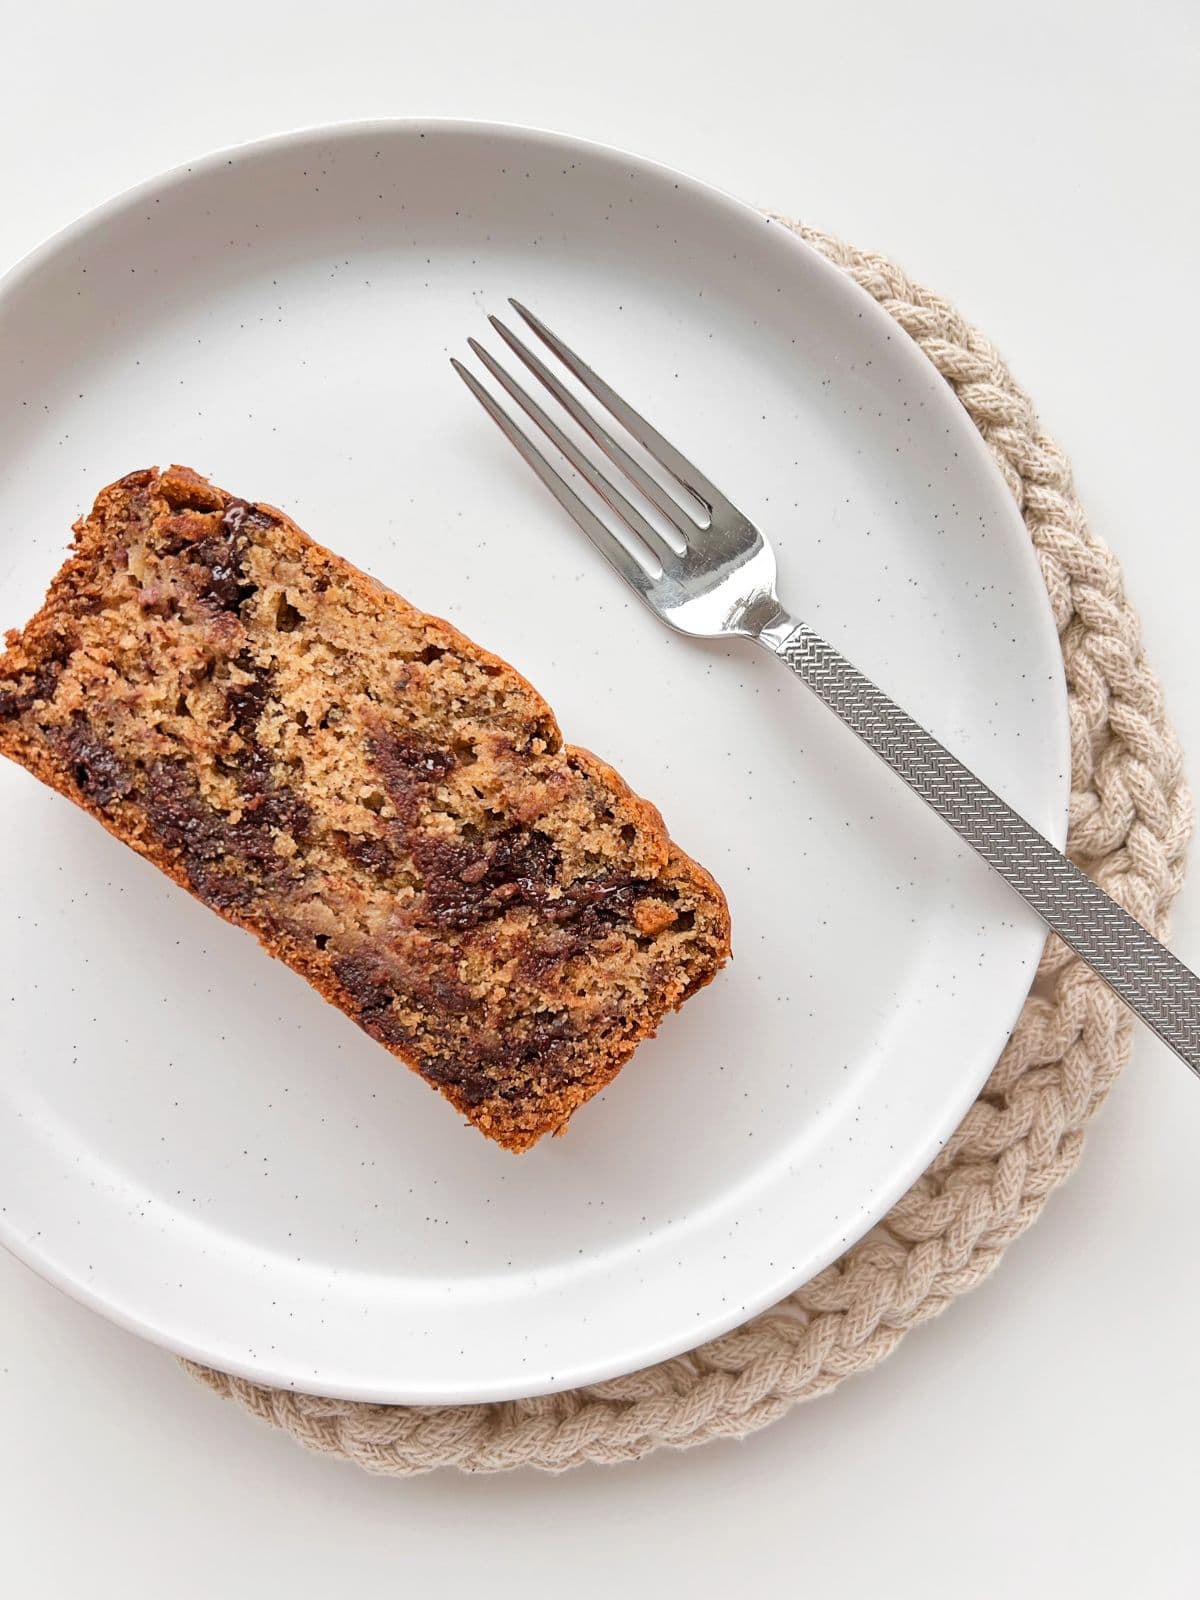 An image of slice of Super Chocolatey Banana Bread sitting on a cream coloured plate with a silver fork nearby.